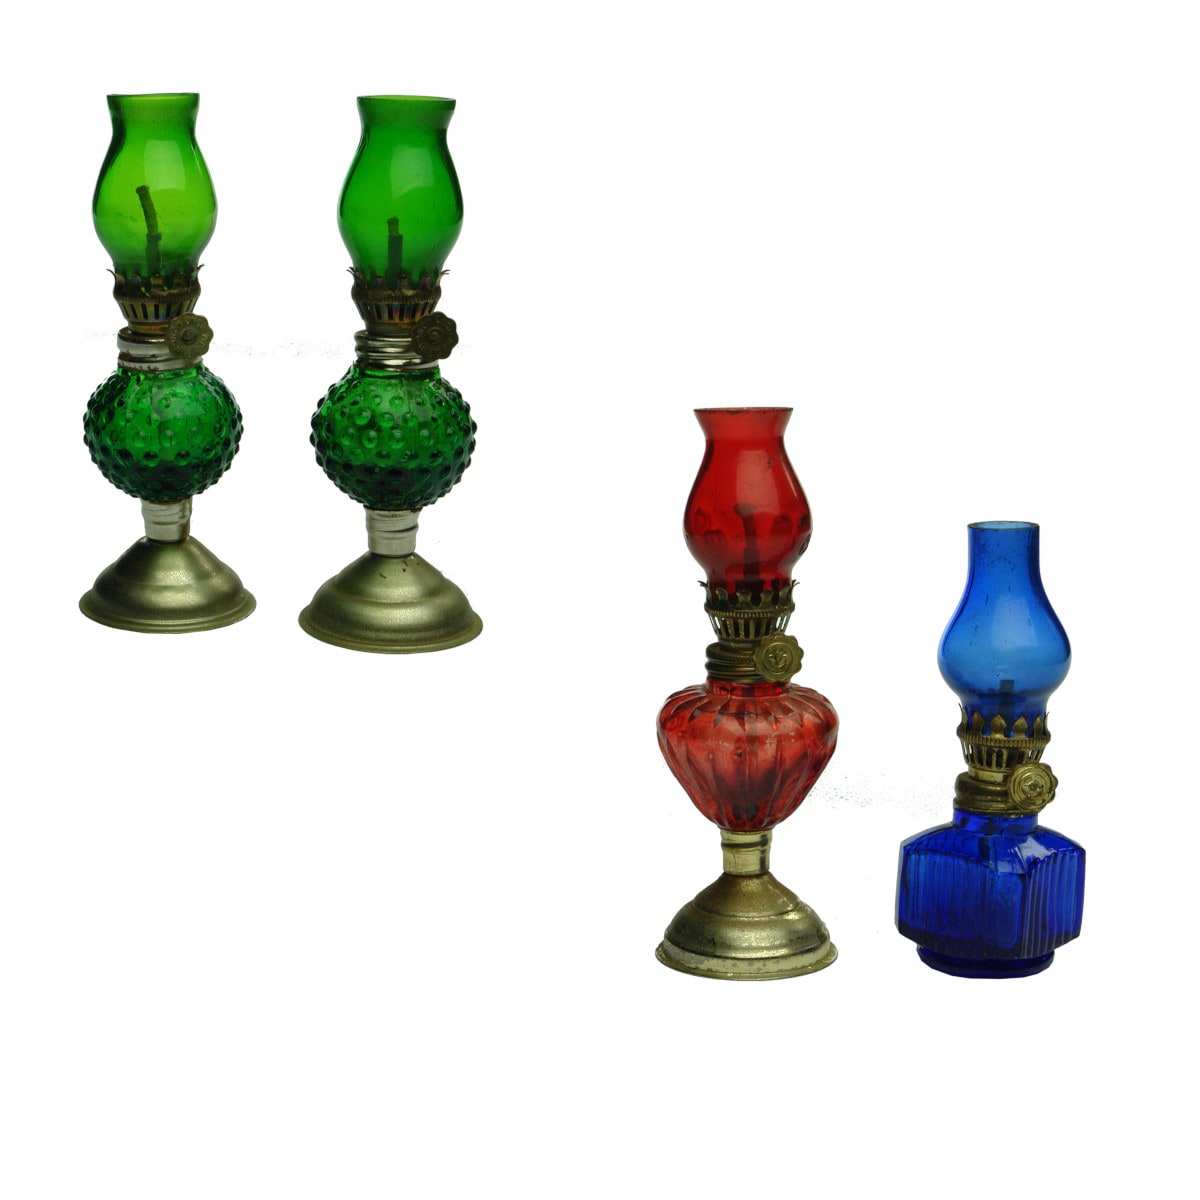 Four Mini Lamps. 2 x Green; Ruby and Cobalt Blue. Brass fittings. Blue with Made in Hong Kong.